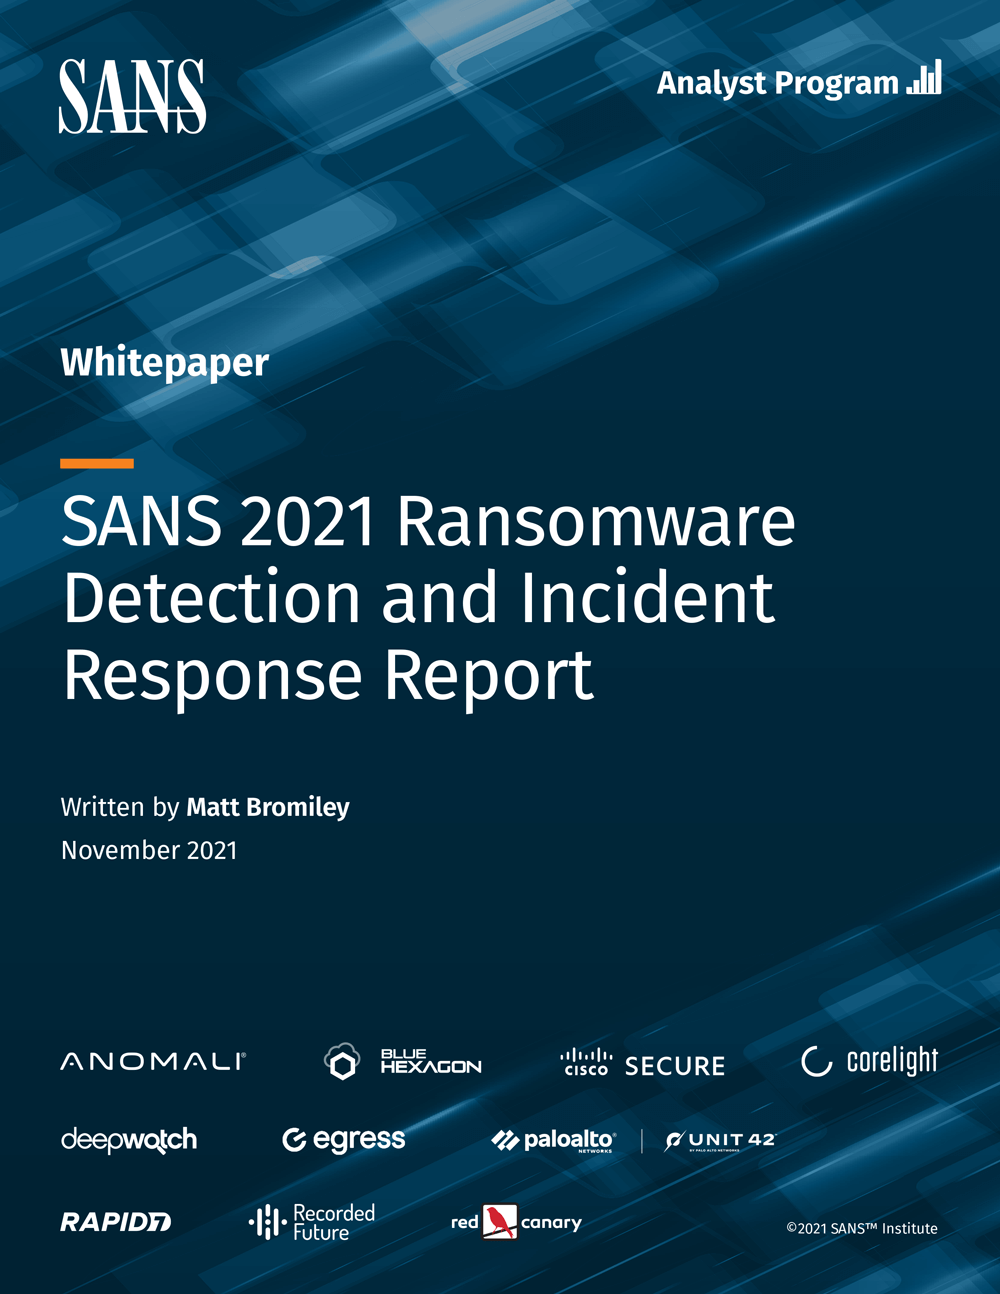 SANS 2021 Ransomware Detection and Incident Response Report